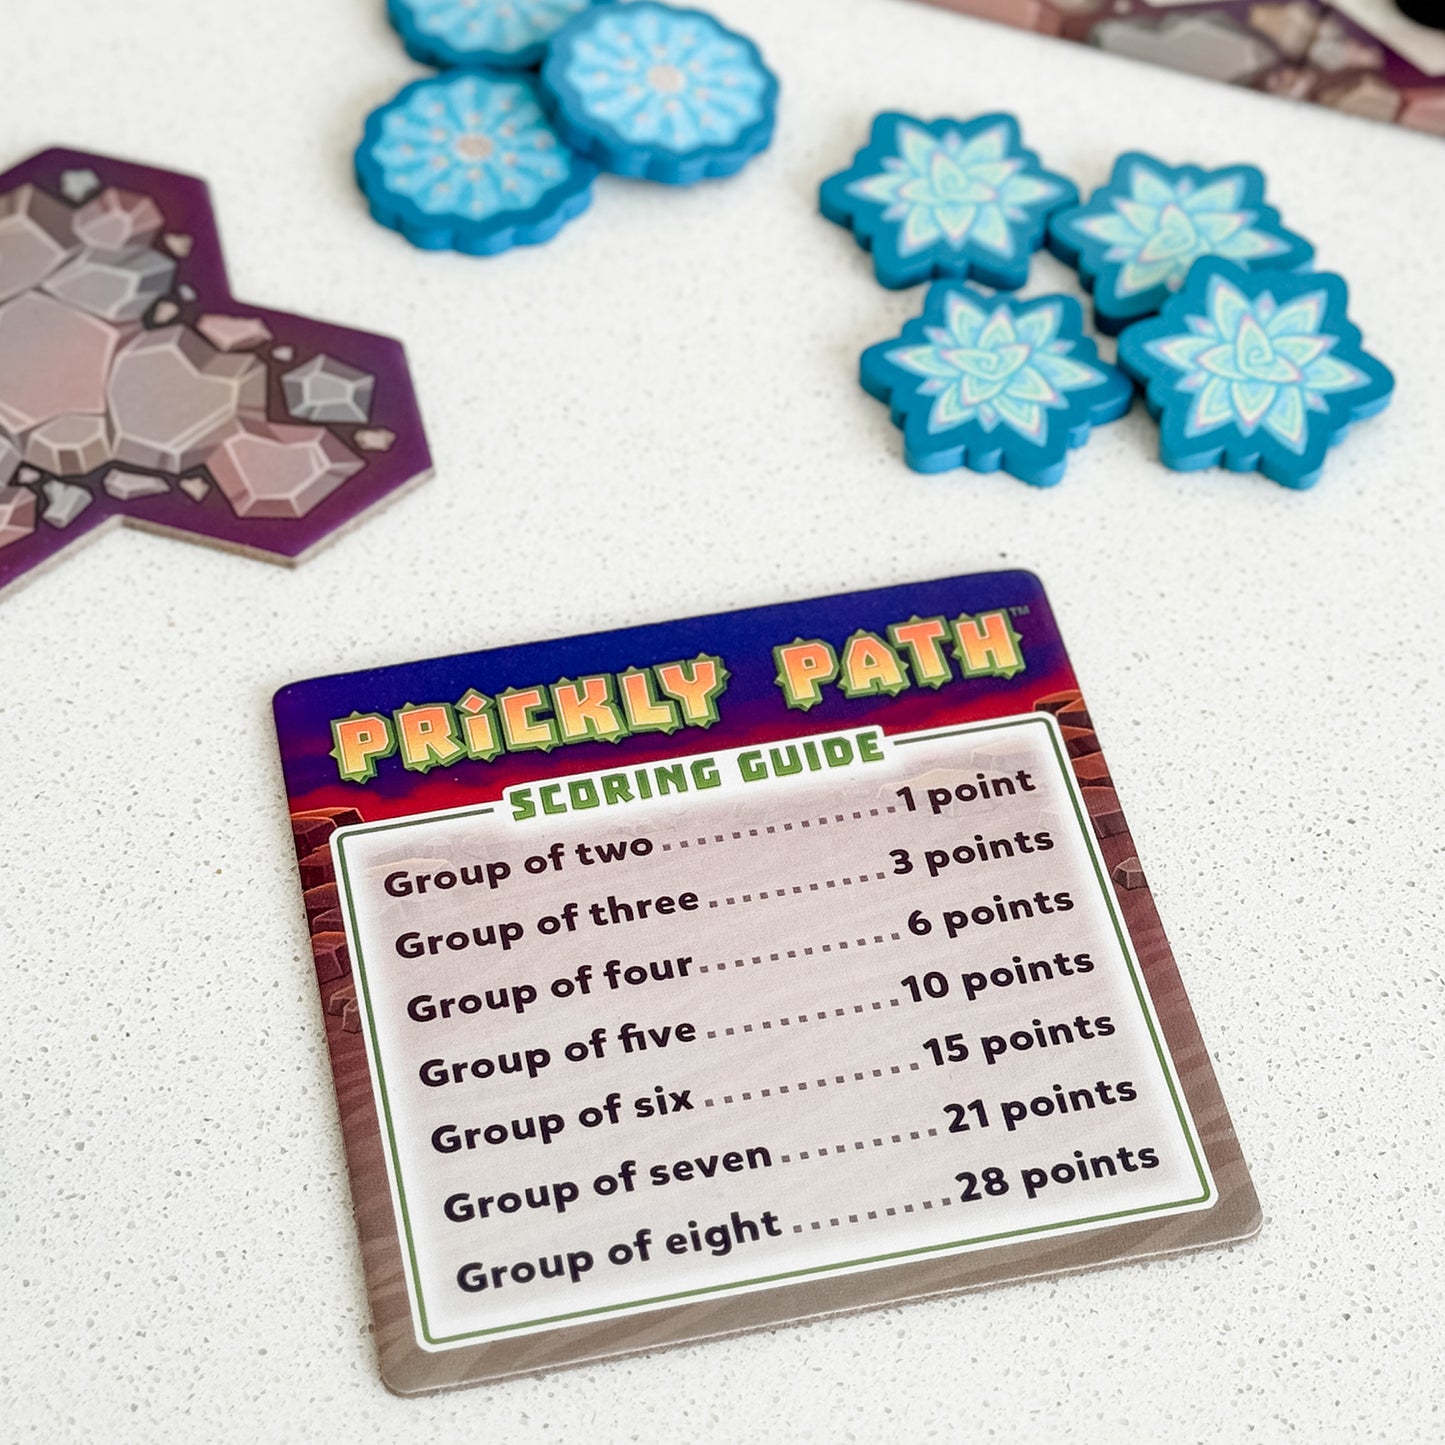 Prickly Path by SimplyFun is a strategy and decision making game for ages 8 and up.